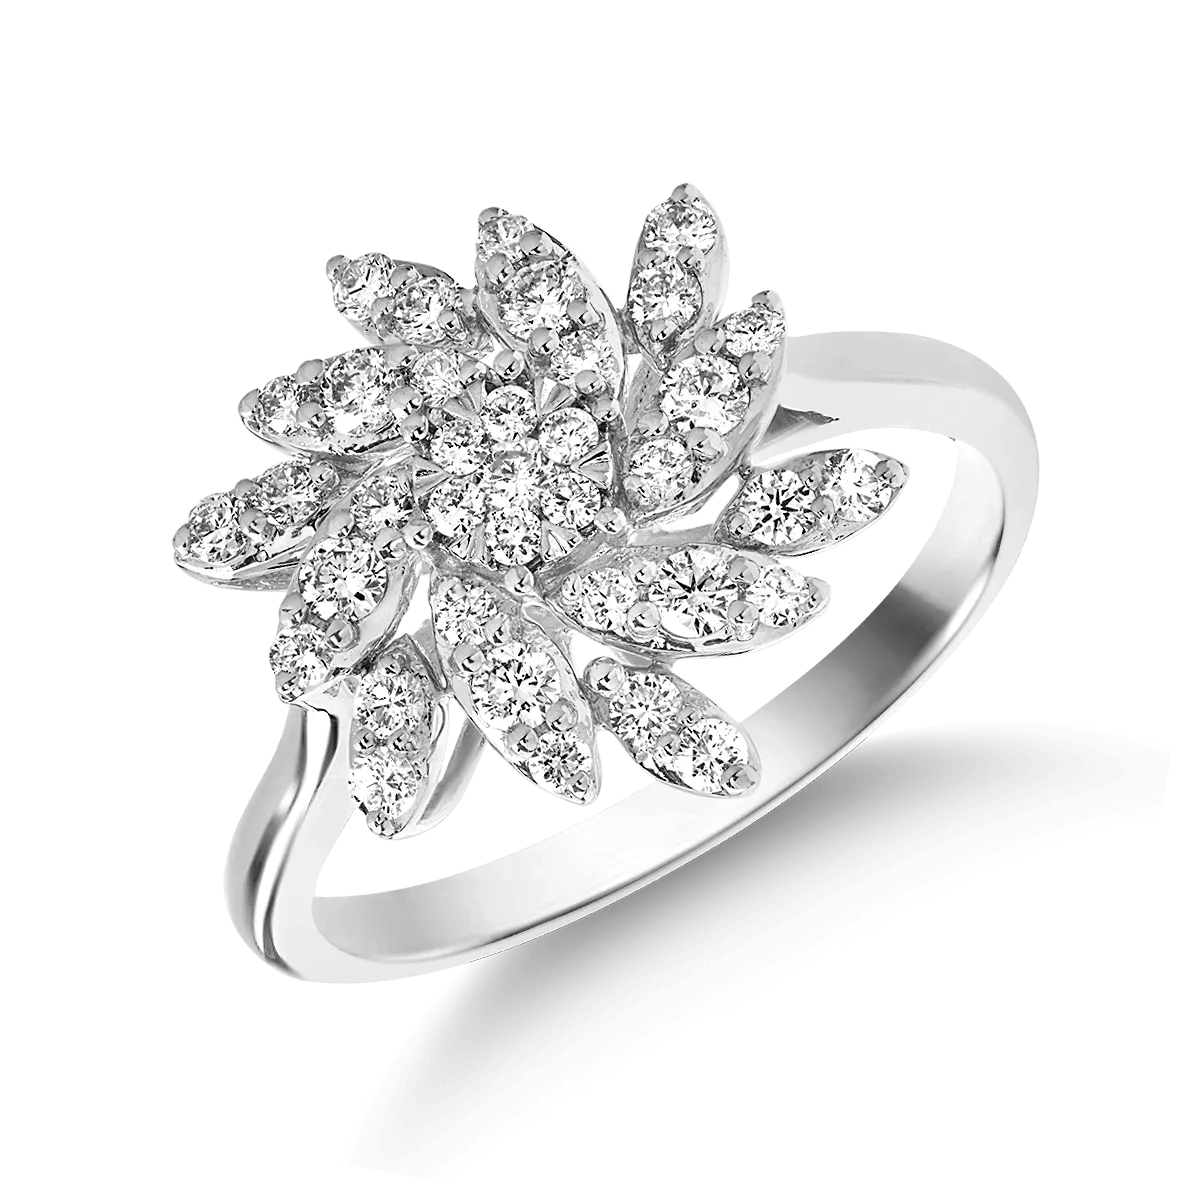 14K white gold ring with 0.5ct diamonds